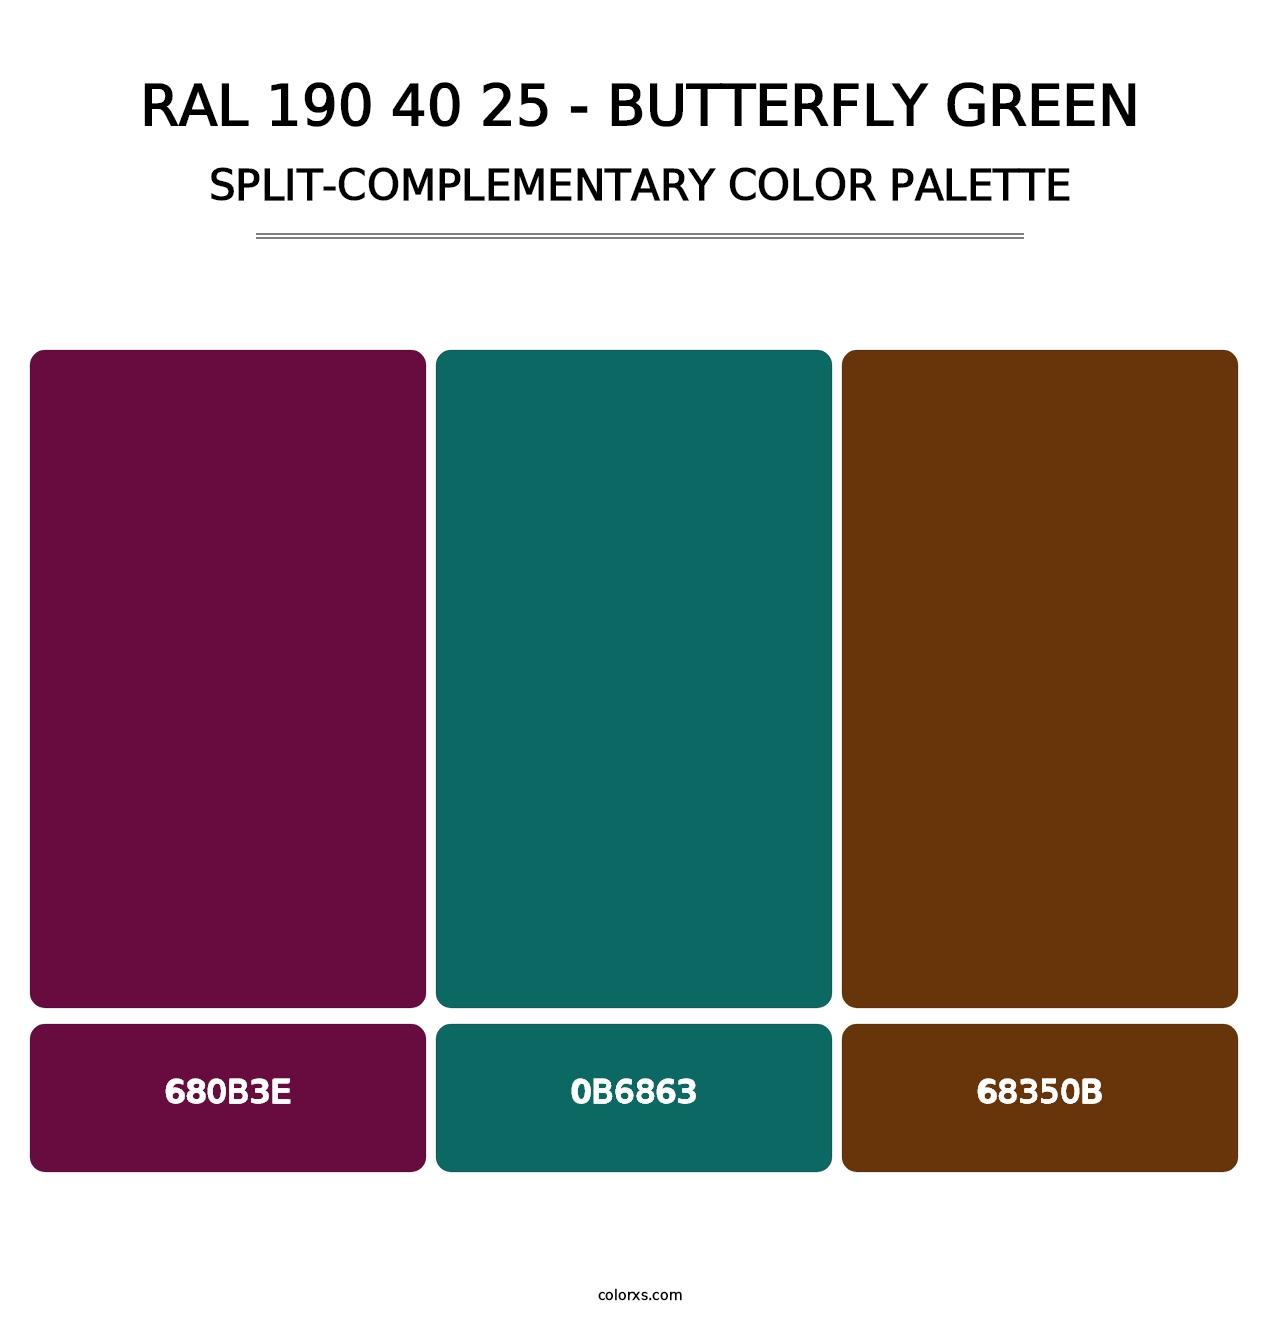 RAL 190 40 25 - Butterfly Green - Split-Complementary Color Palette